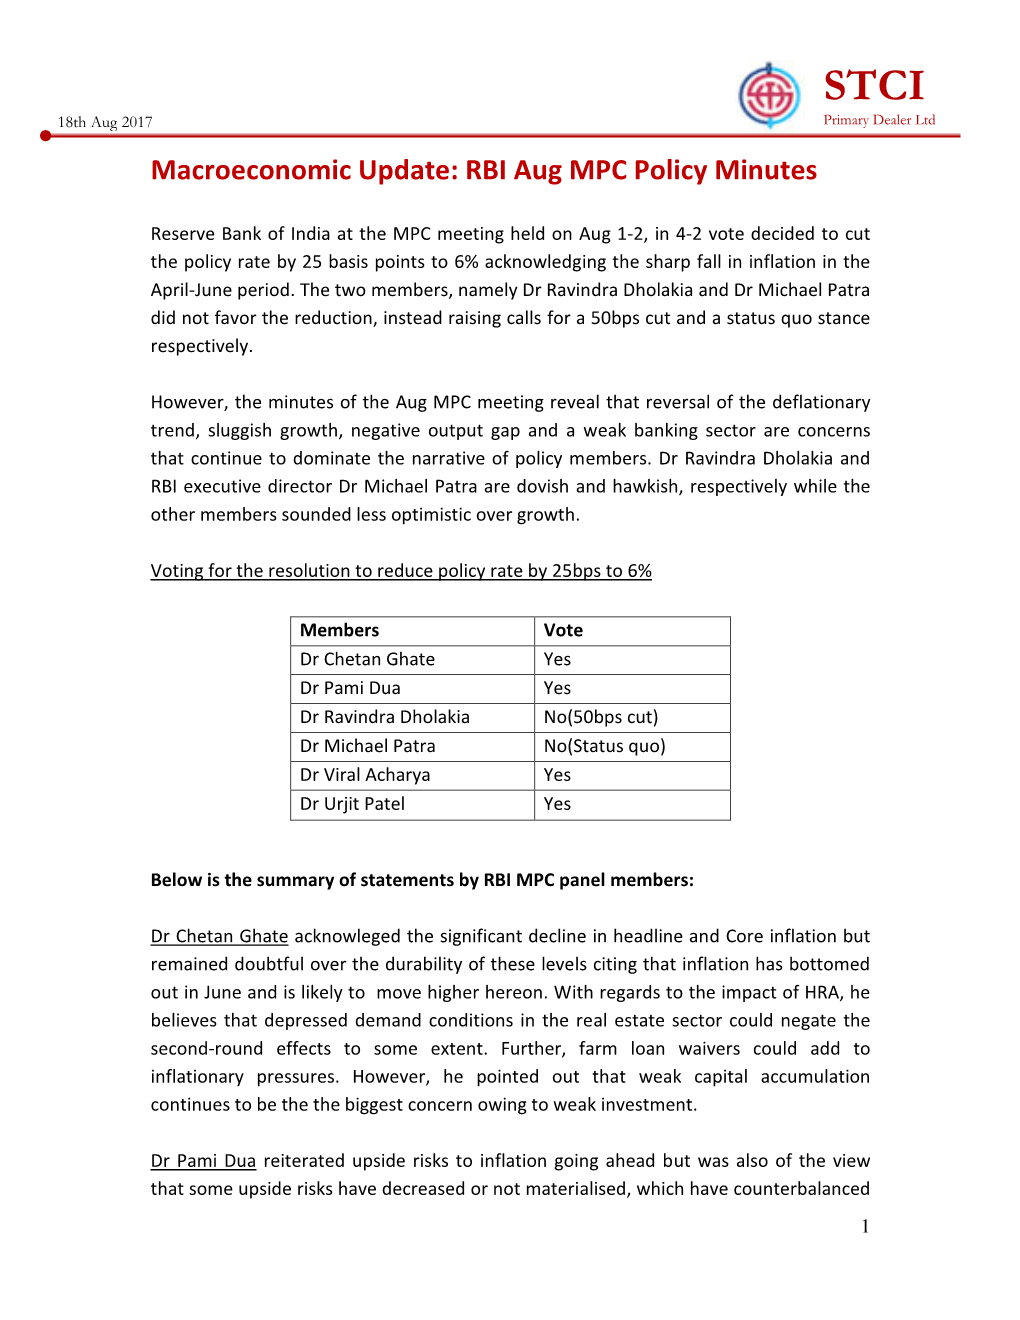 Macroeconomic Update: RBI Aug MPC Policy Minutes